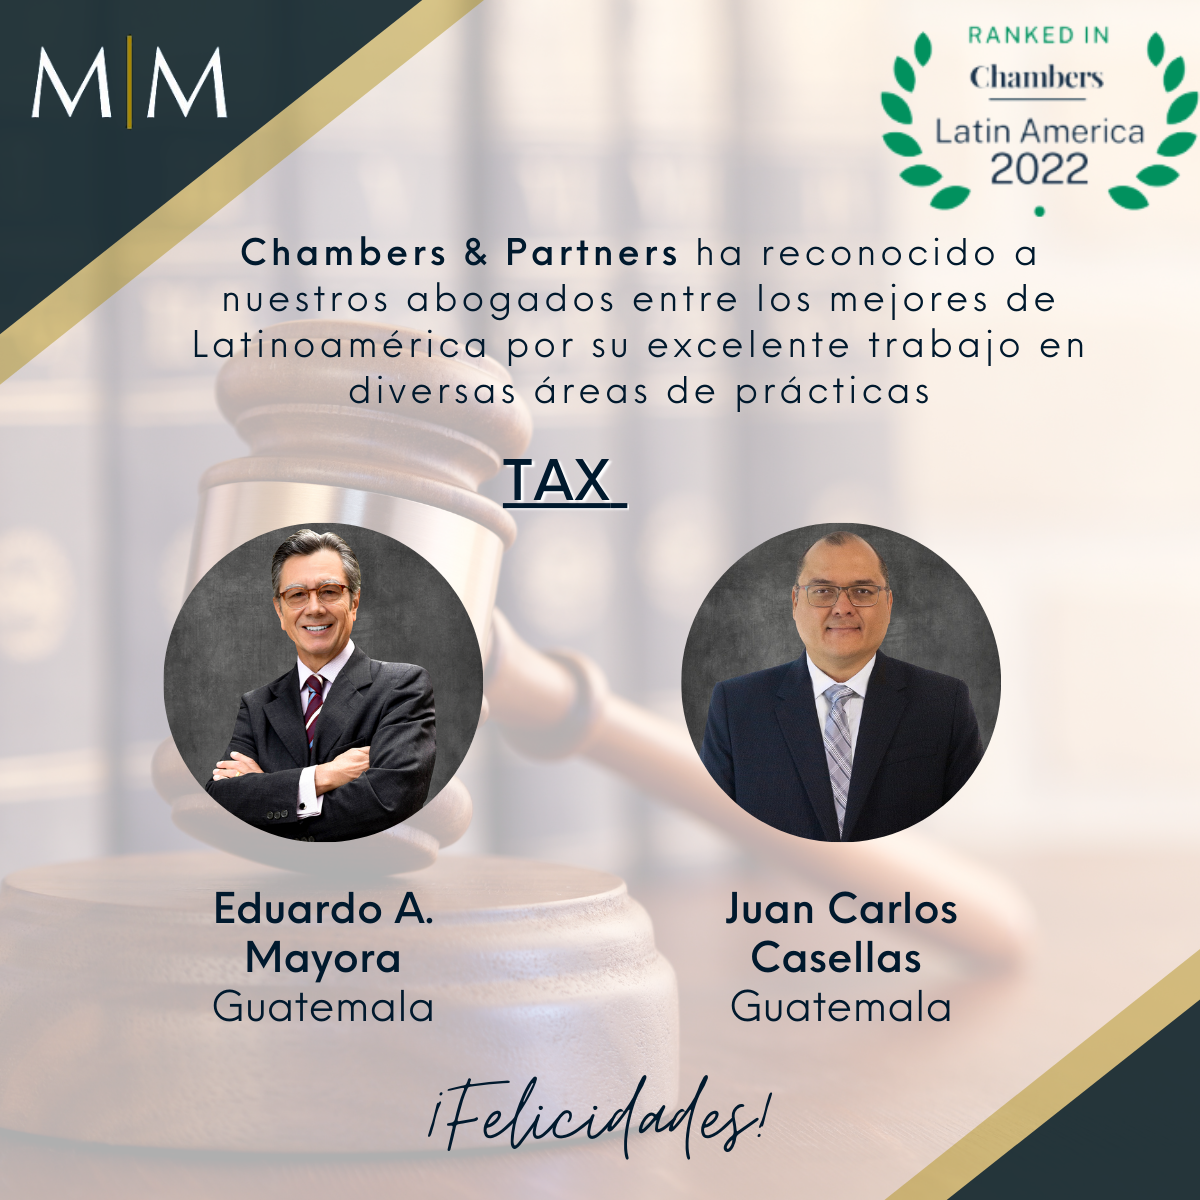 You are currently viewing M&M Reconocimiento- Chambers & Partners “Tax”